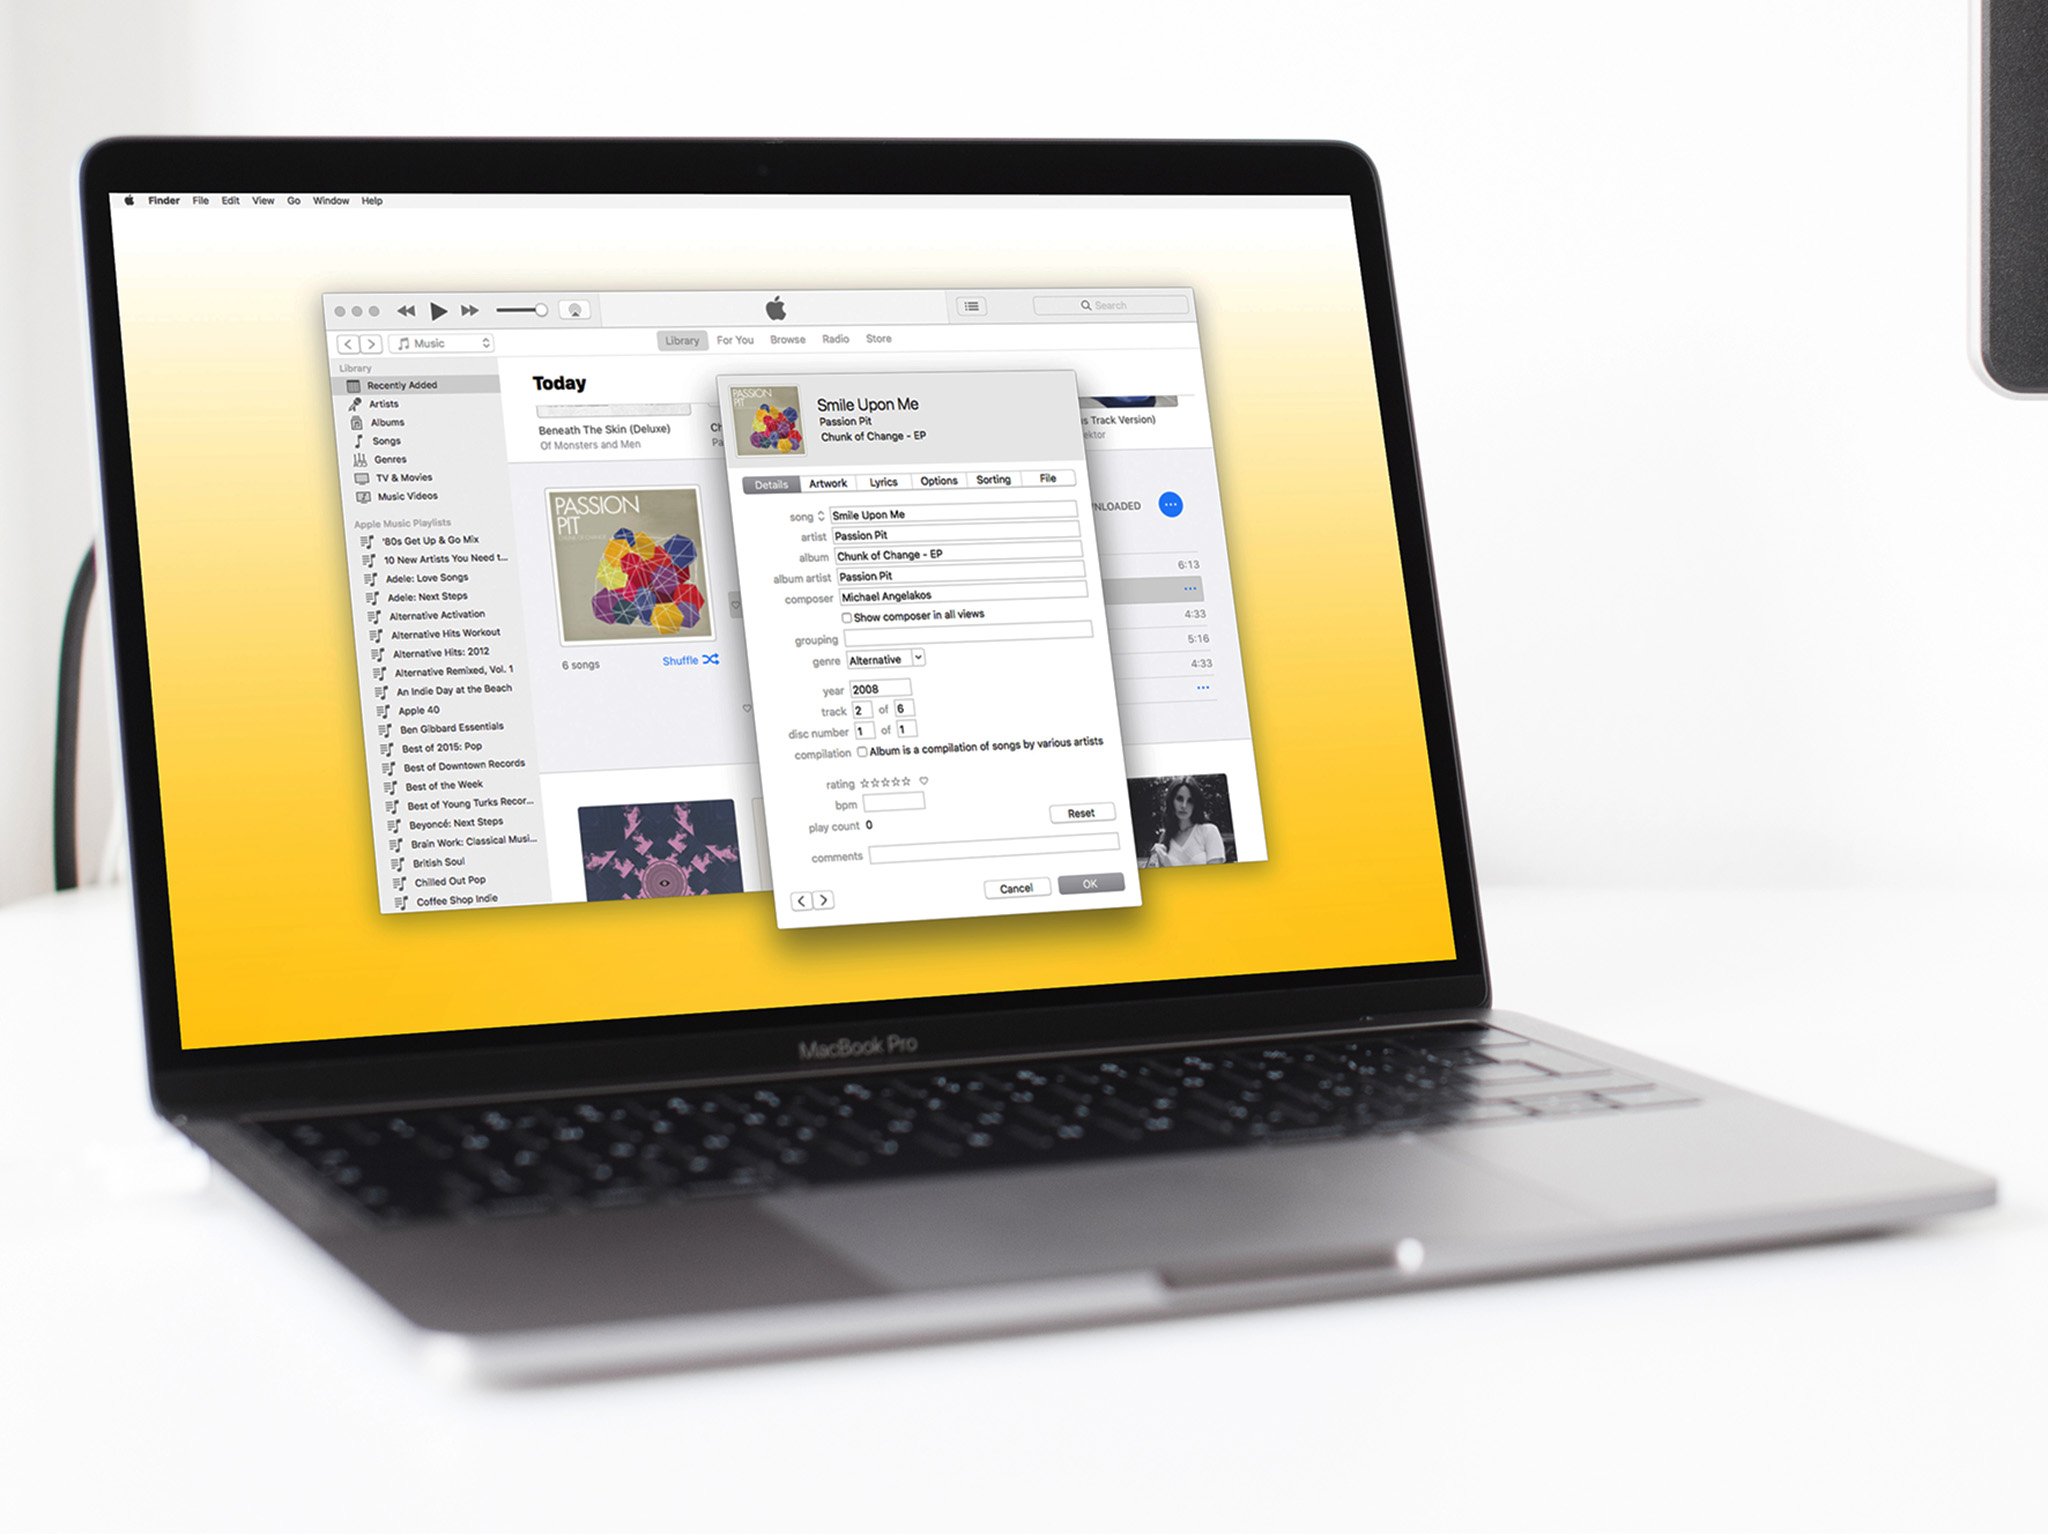 A MacBook Pro is shown with iTunes launched on screen. A song&#39;s metadata is being edited.